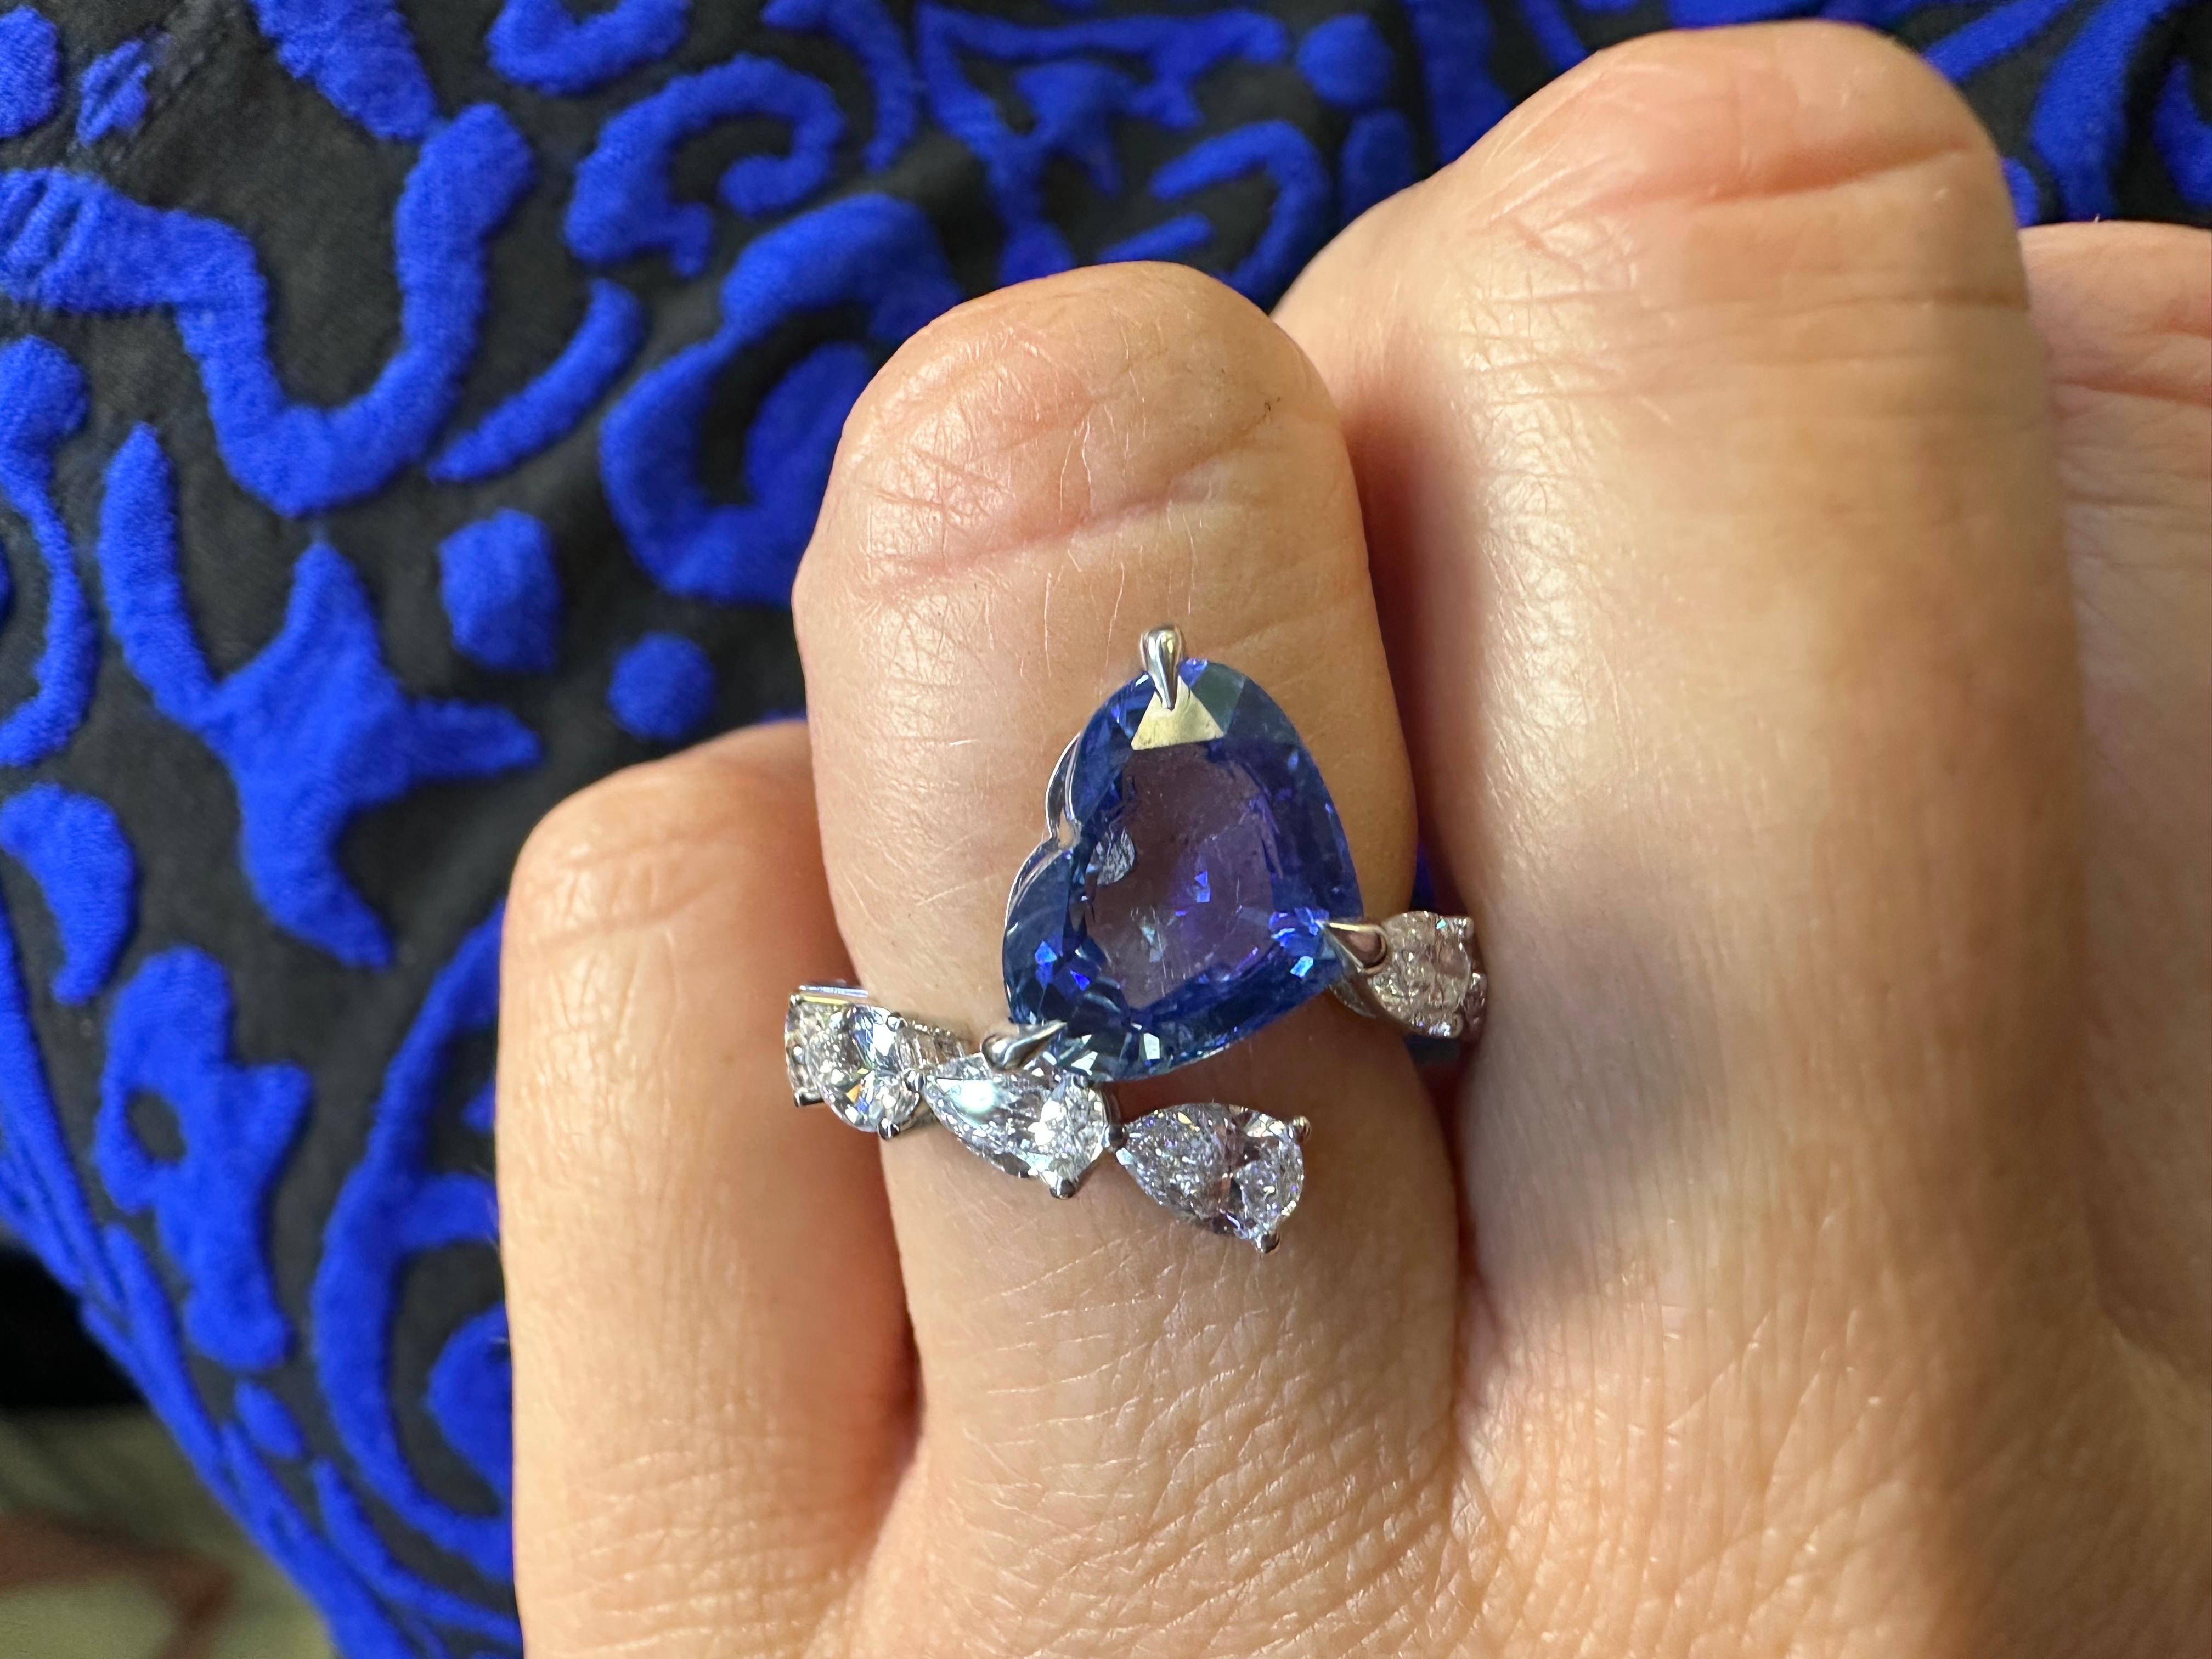 Gorgeous heart sapphire & diamond ring in platinum, very unique modern design!

Metal Type: platinum
Natural Sapphire(s):
Color: Blue
Cut: Heart
Carat: 4.38ct
Clarity: Slightly Included

Natural Diamond(s): 
Color: F-G
Cut:Pear Brilliant
Carat: